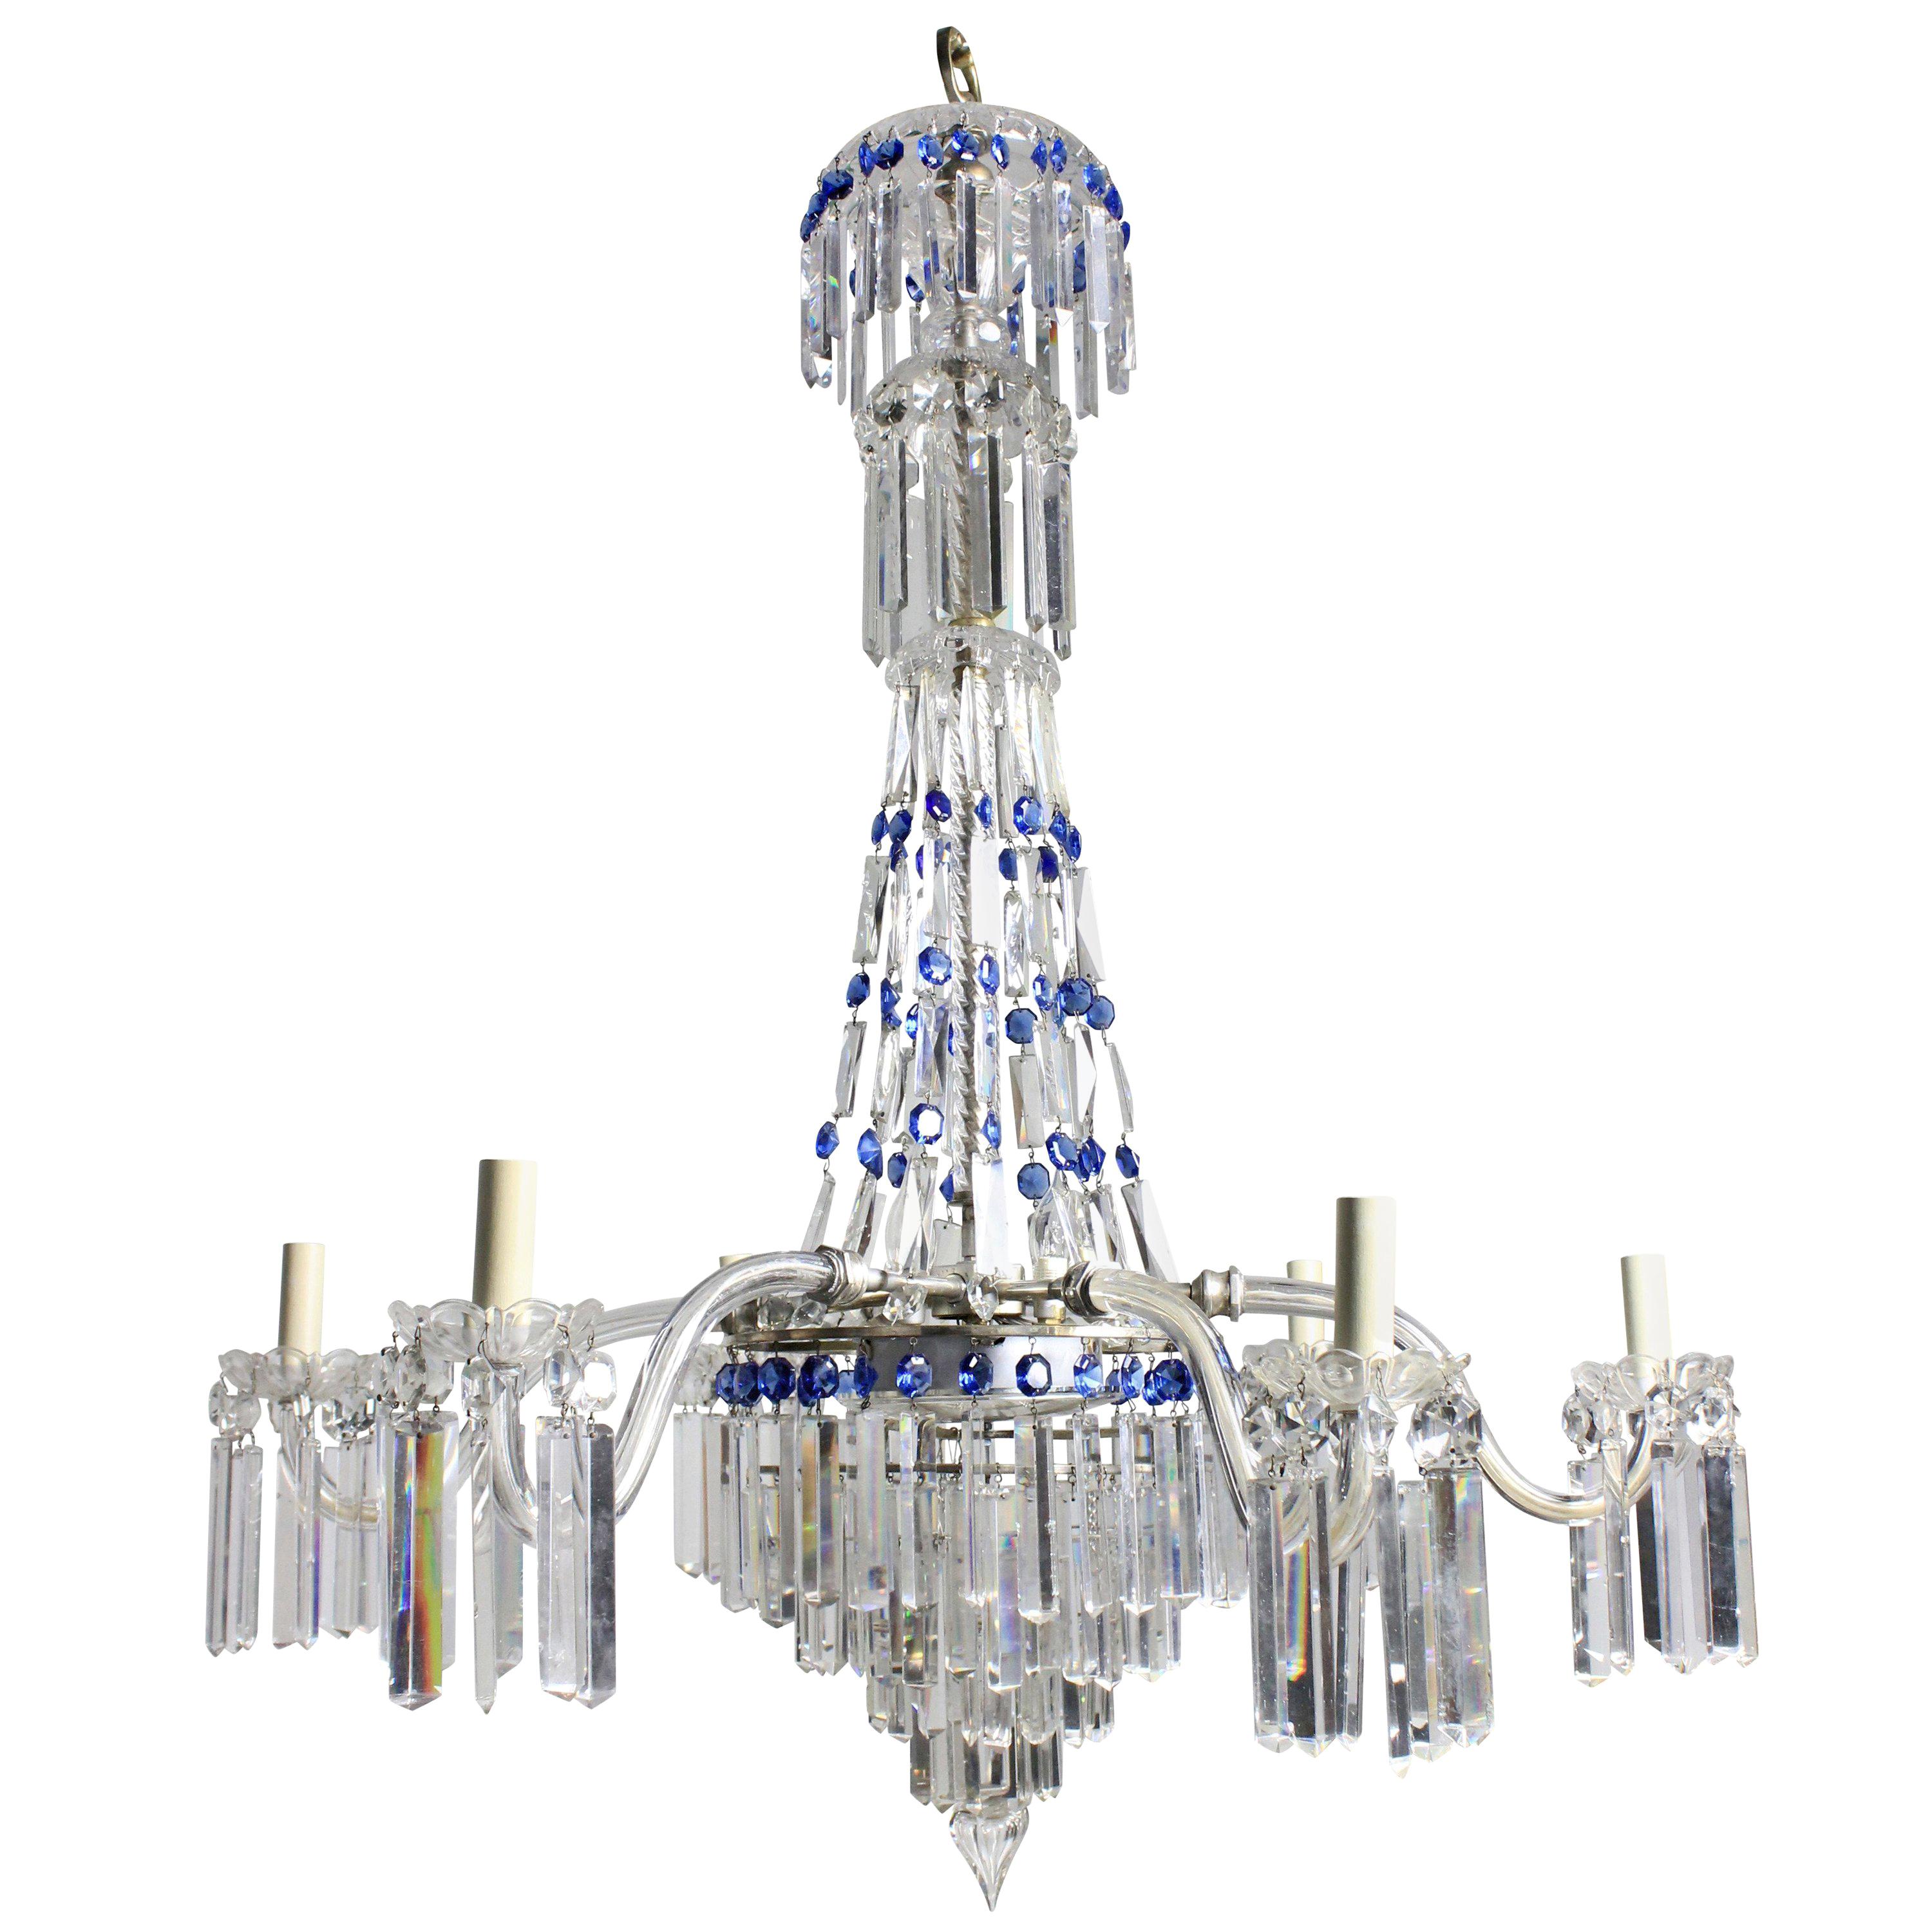 A fine English cut-glass tent and waterfall chandelier with blue glass detailing. Formerly a gasolier.